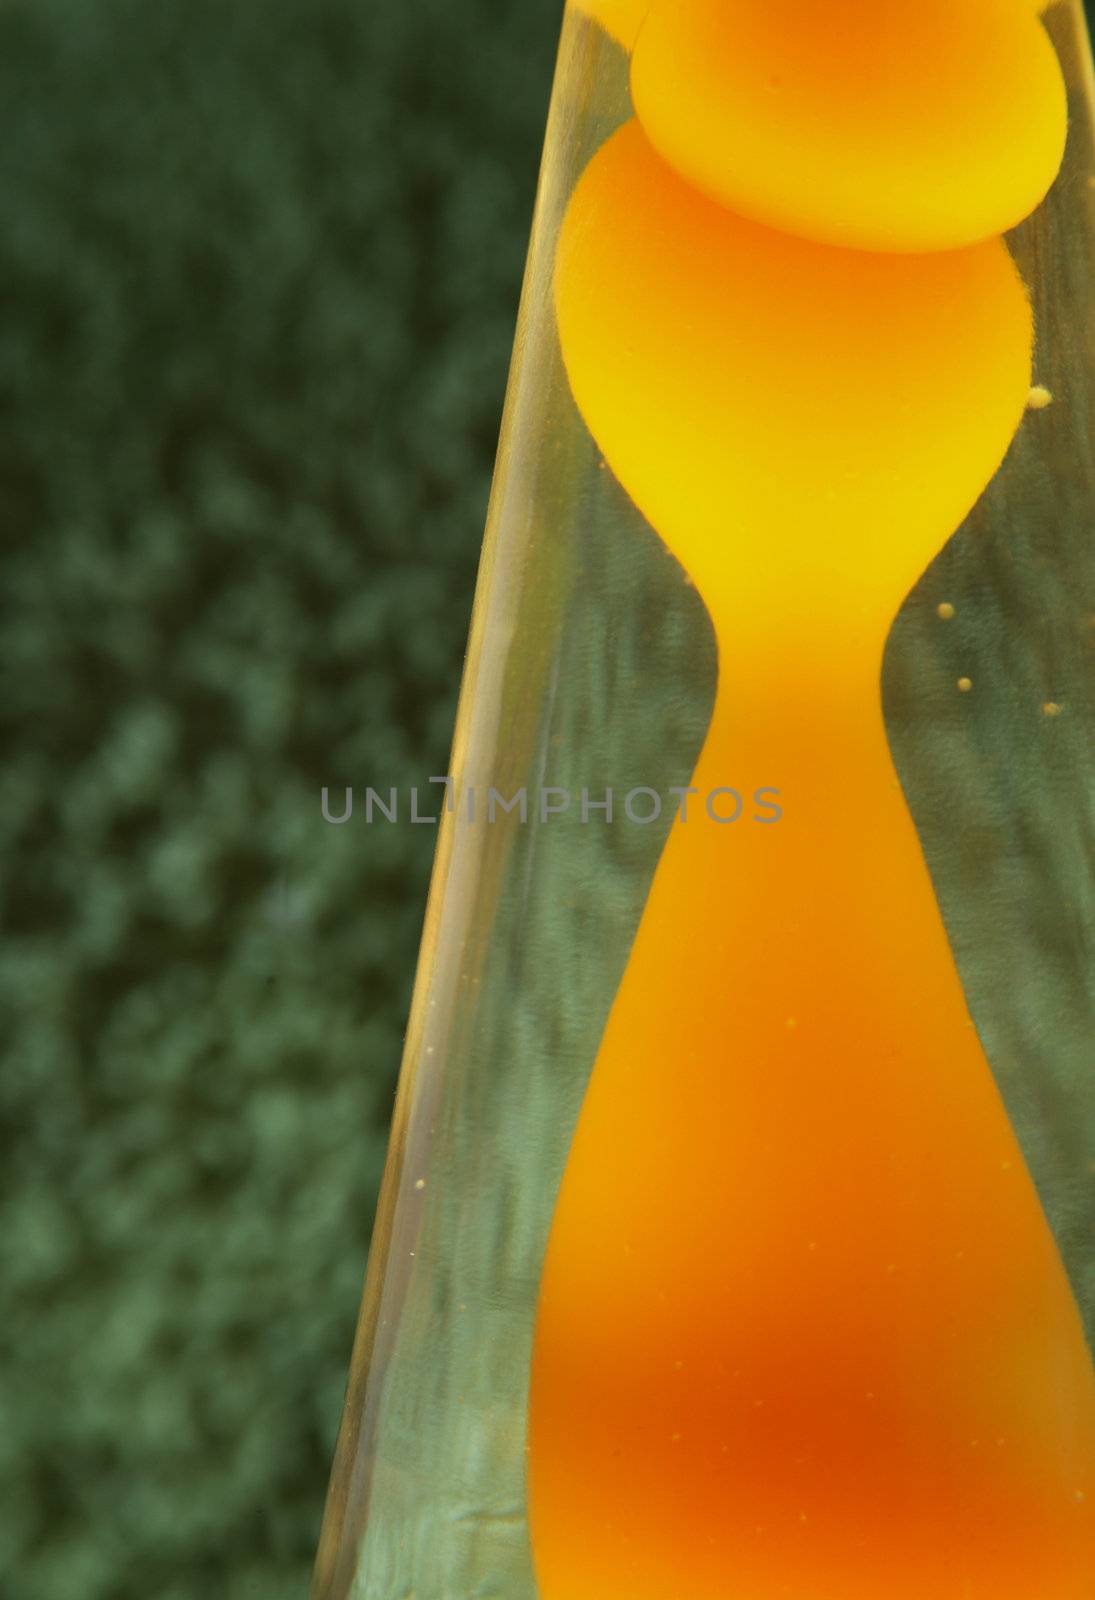 Lava lamp with yellow contents.